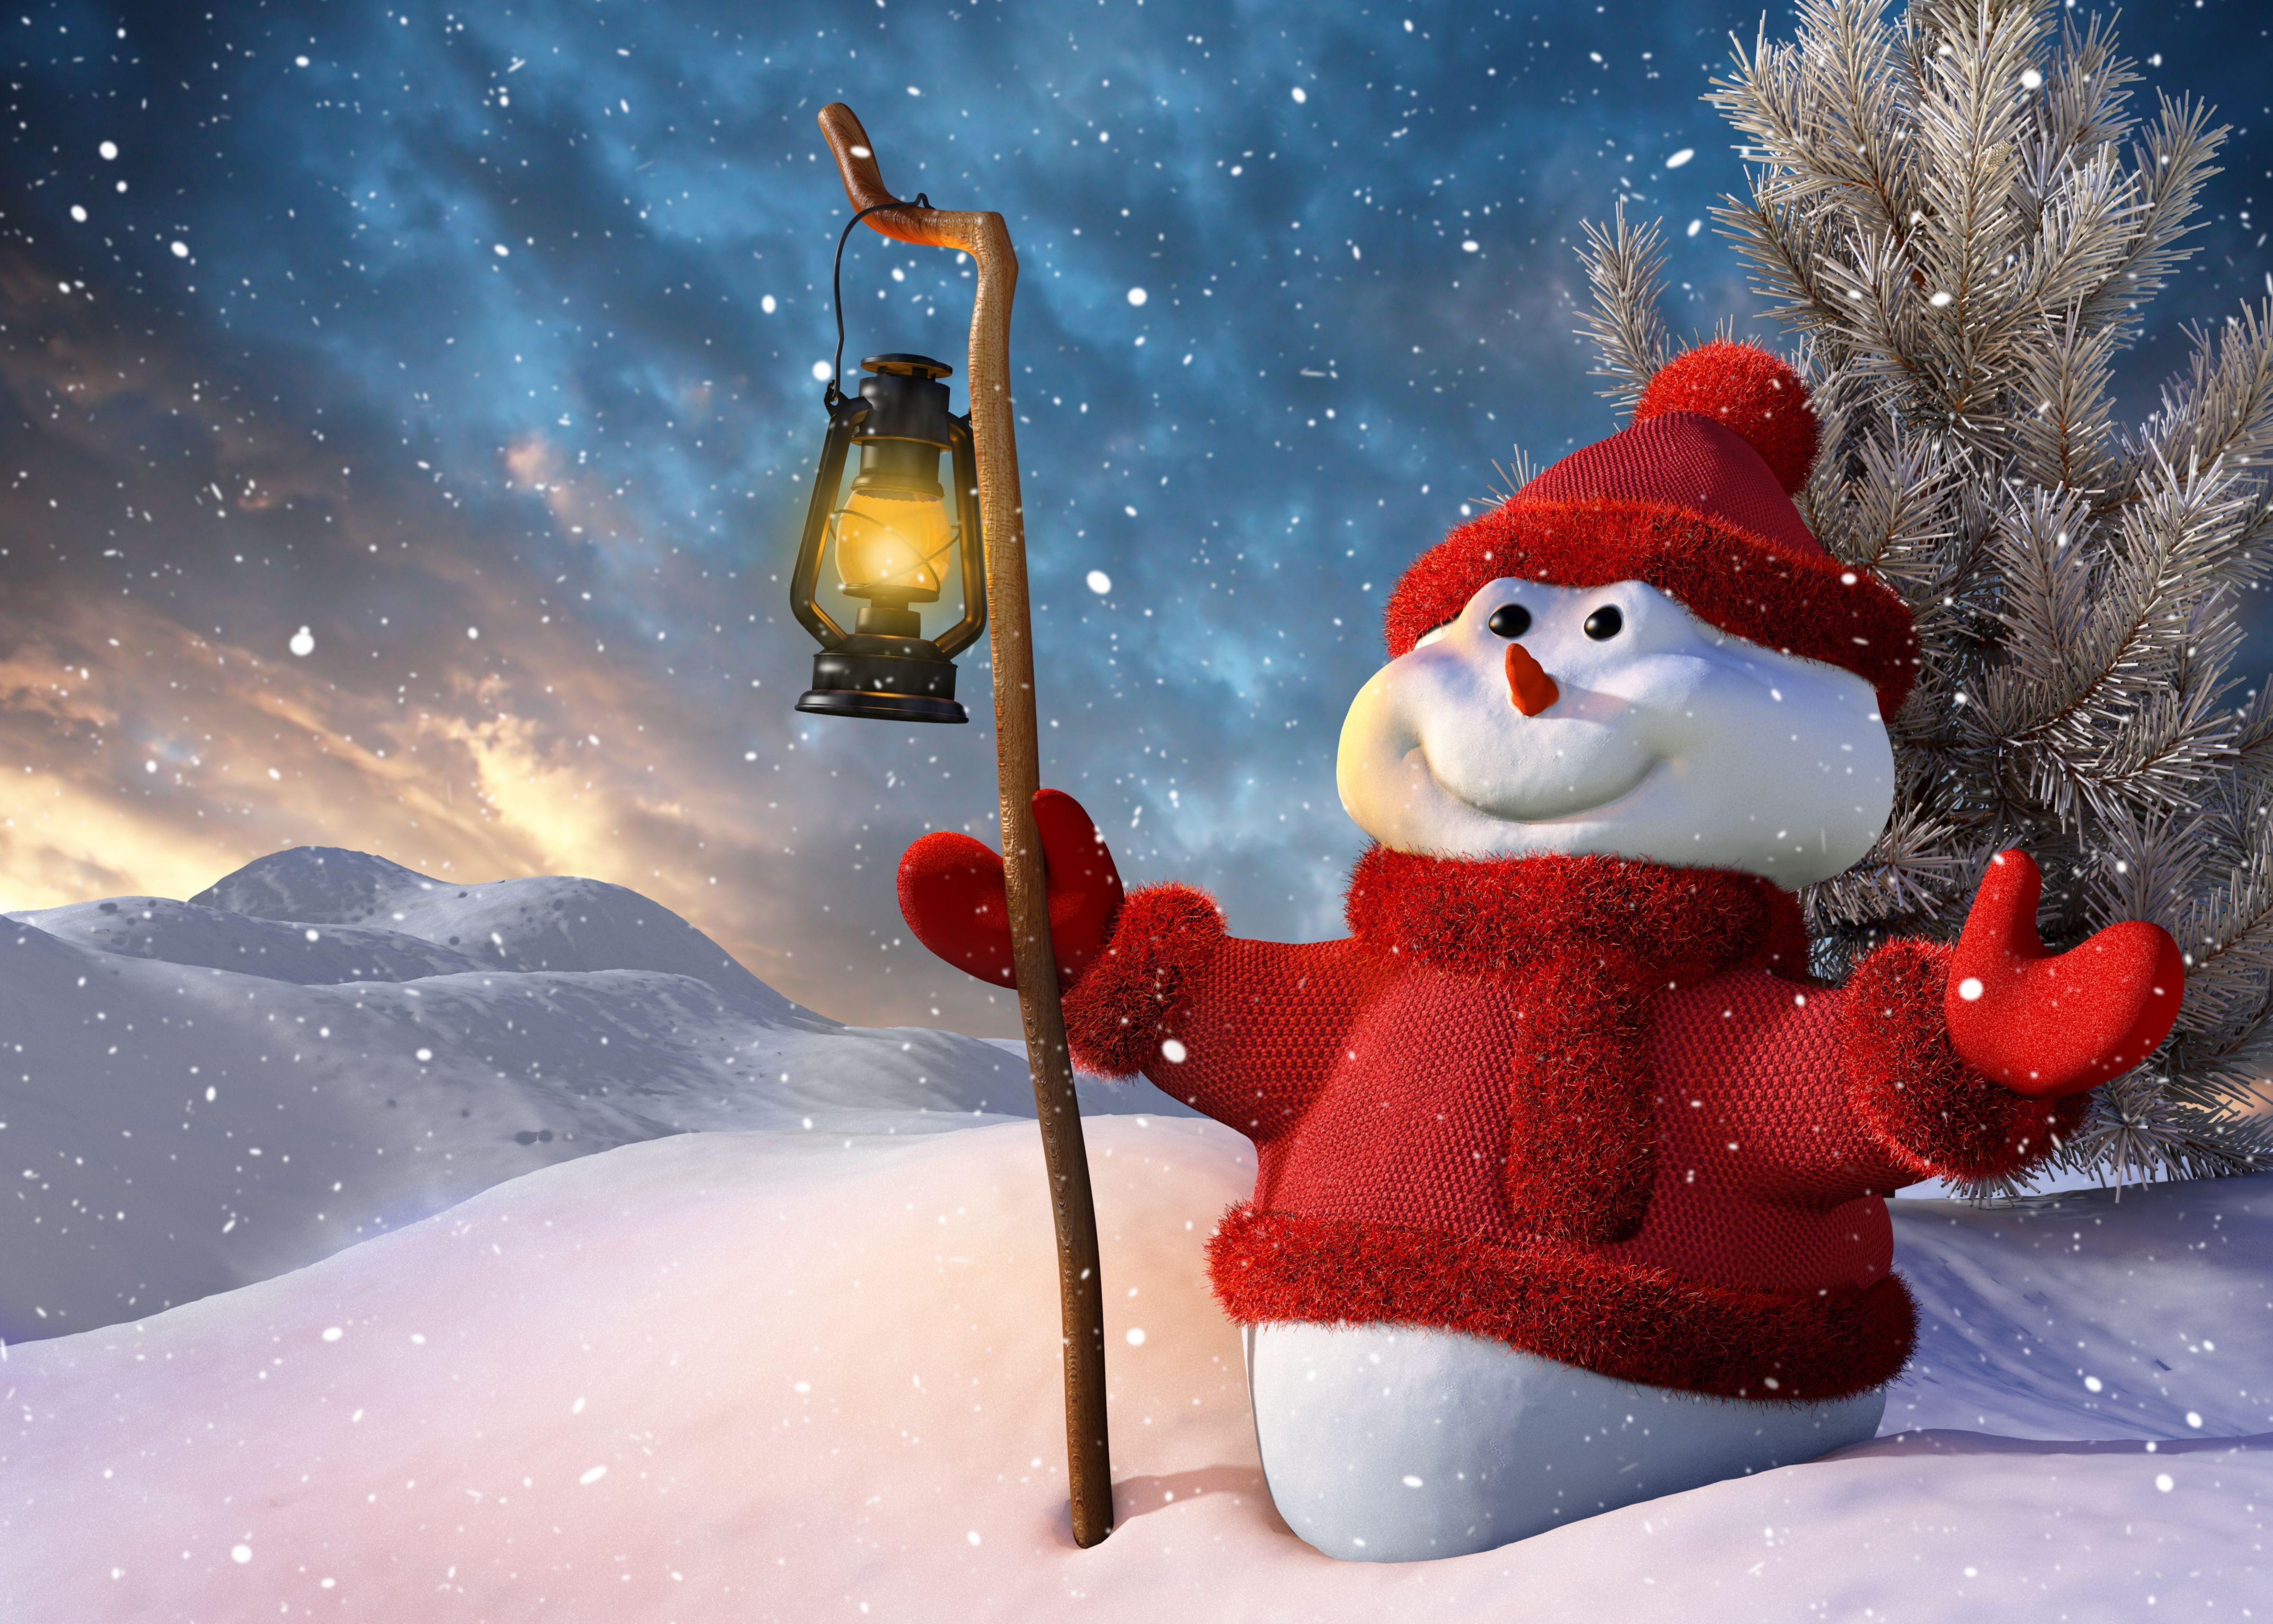 new year, christmas, snowman, lamp, tree, snow, smiling, snowman in red sweater holding lantern illustration